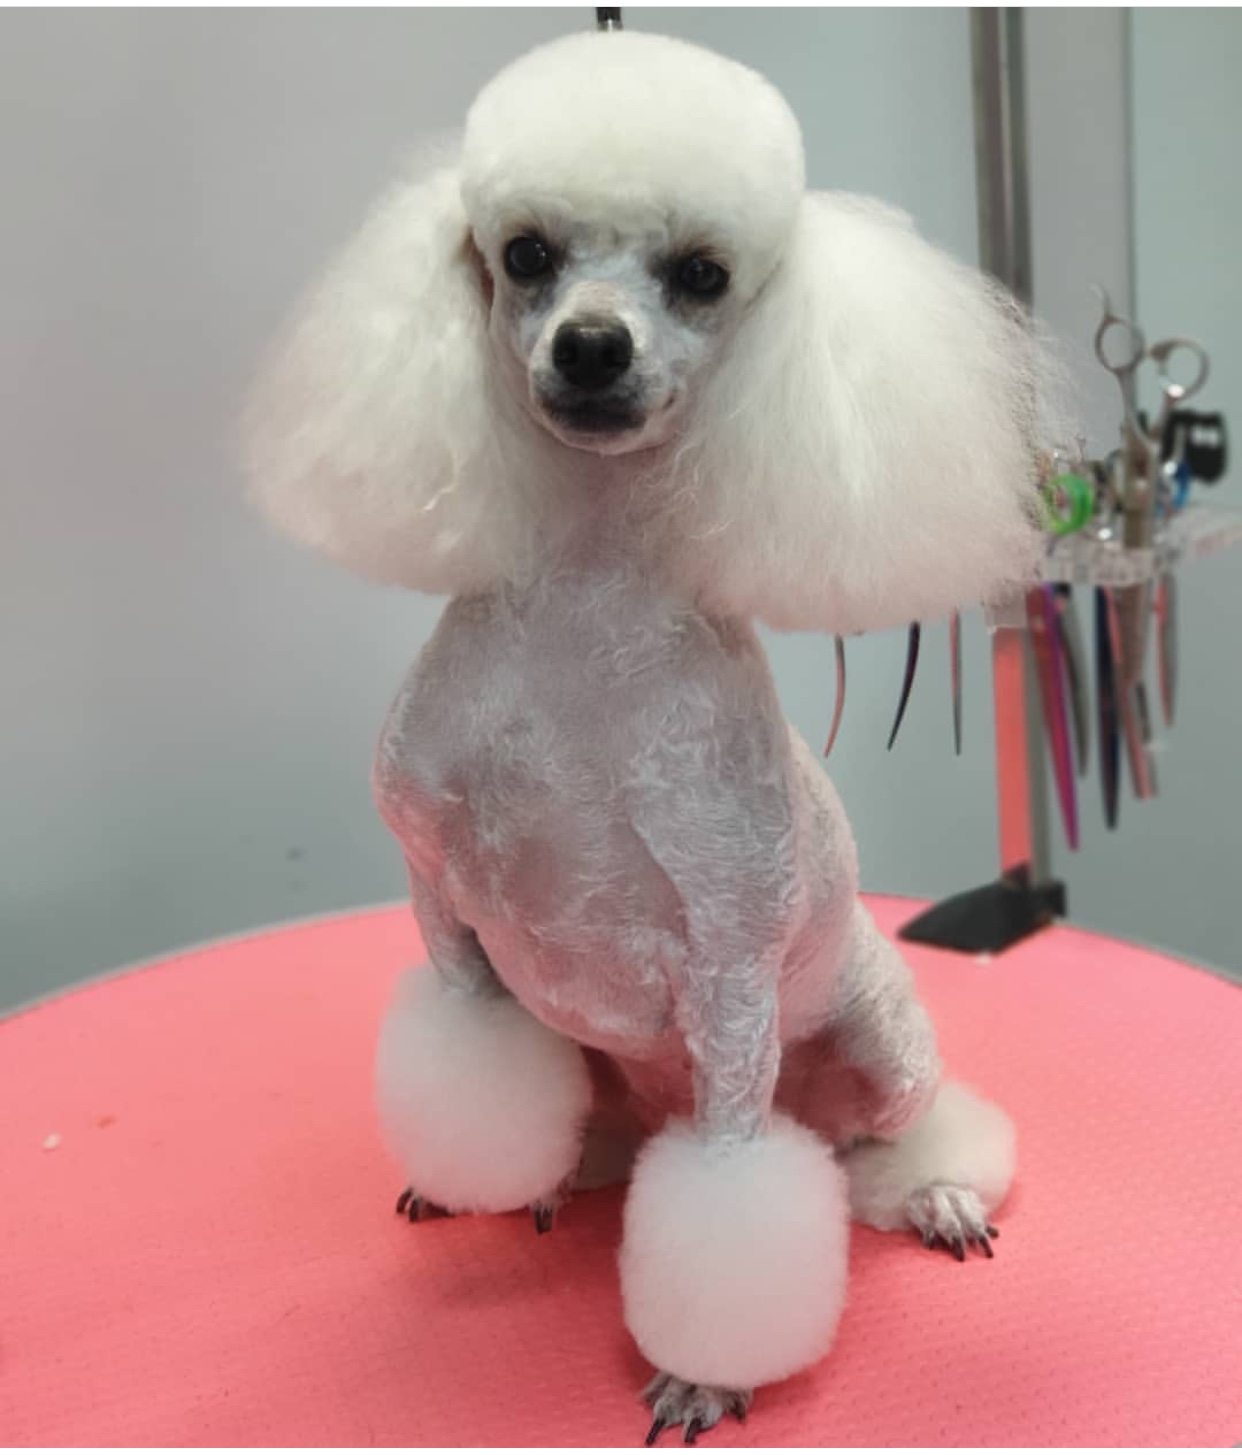 A white Poodle sitting on top of the grooming table